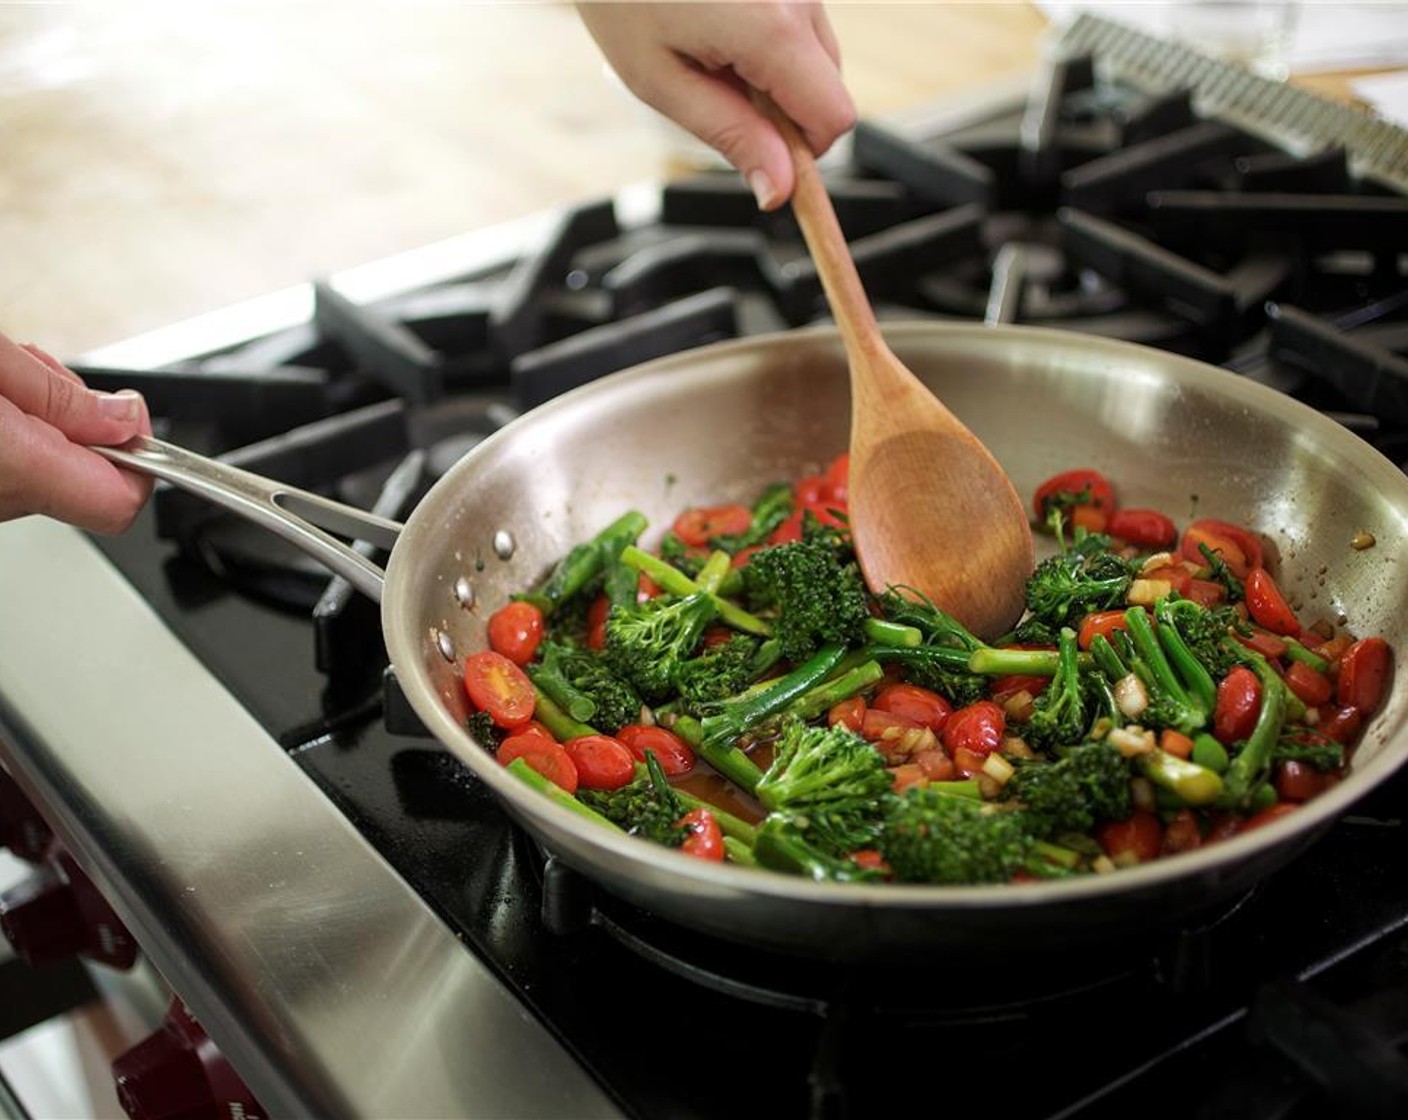 step 7 Without rinsing the saute pan, return it to medium high heat. When hot, add the broccolini and asparagus, and cook for two minutes while occasionally stirring.